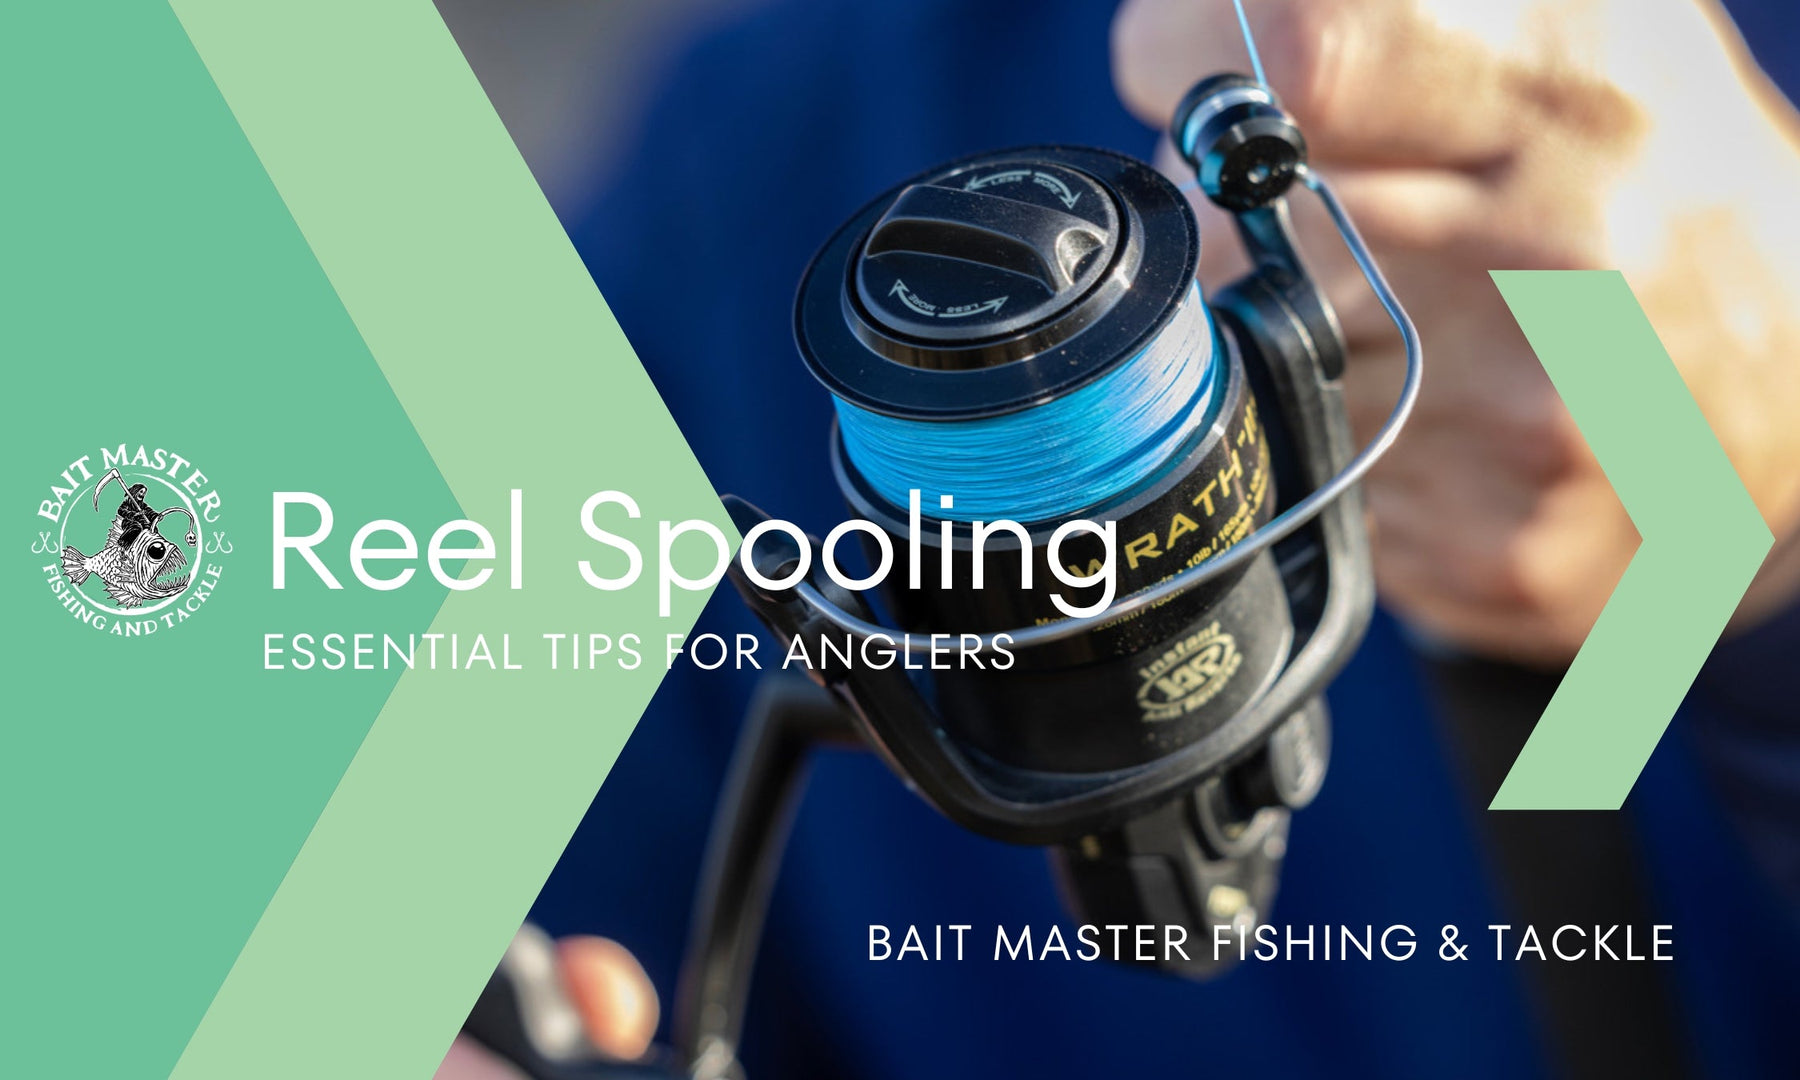 Spooling Your Fishing Reel: Essential Tips for Anglers